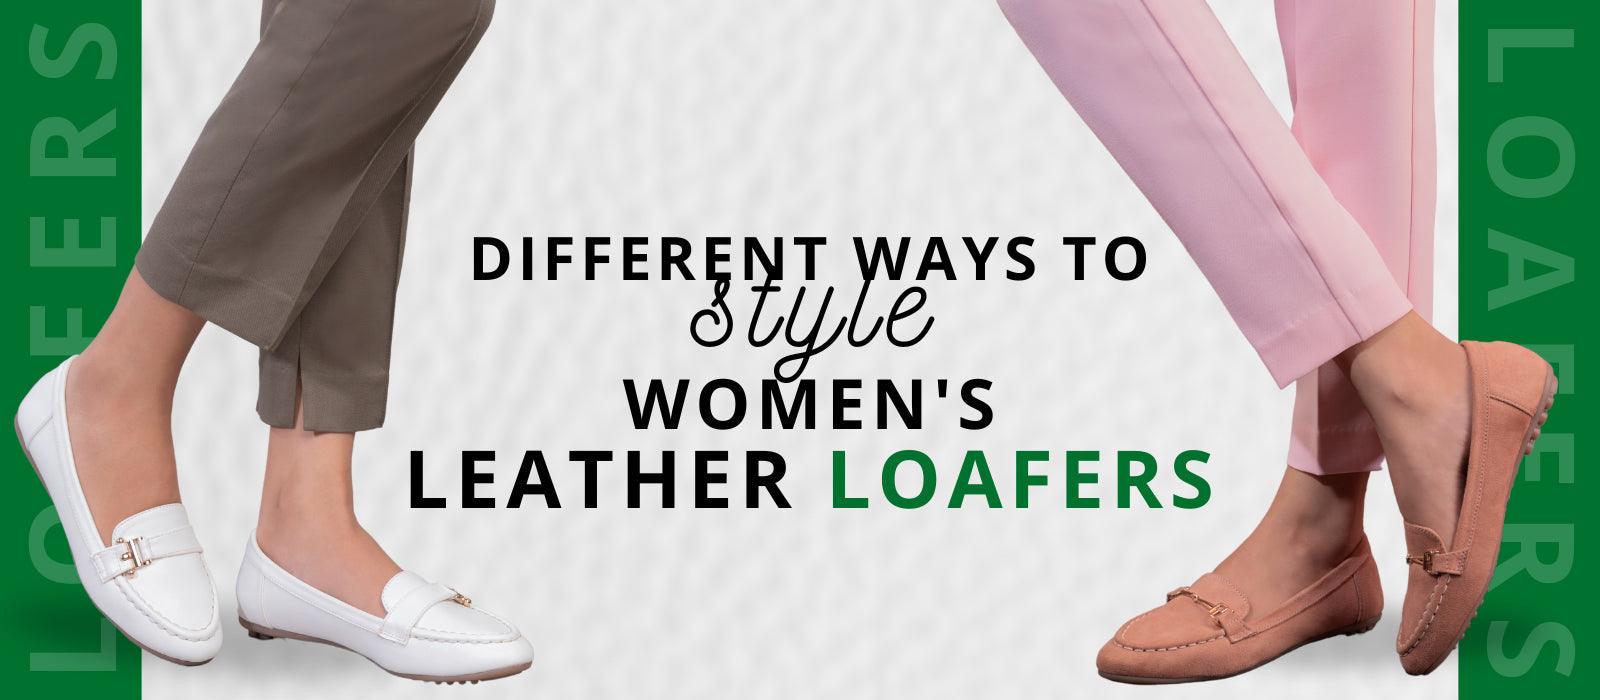 Different ways to style women's leather loafers - Tresmode